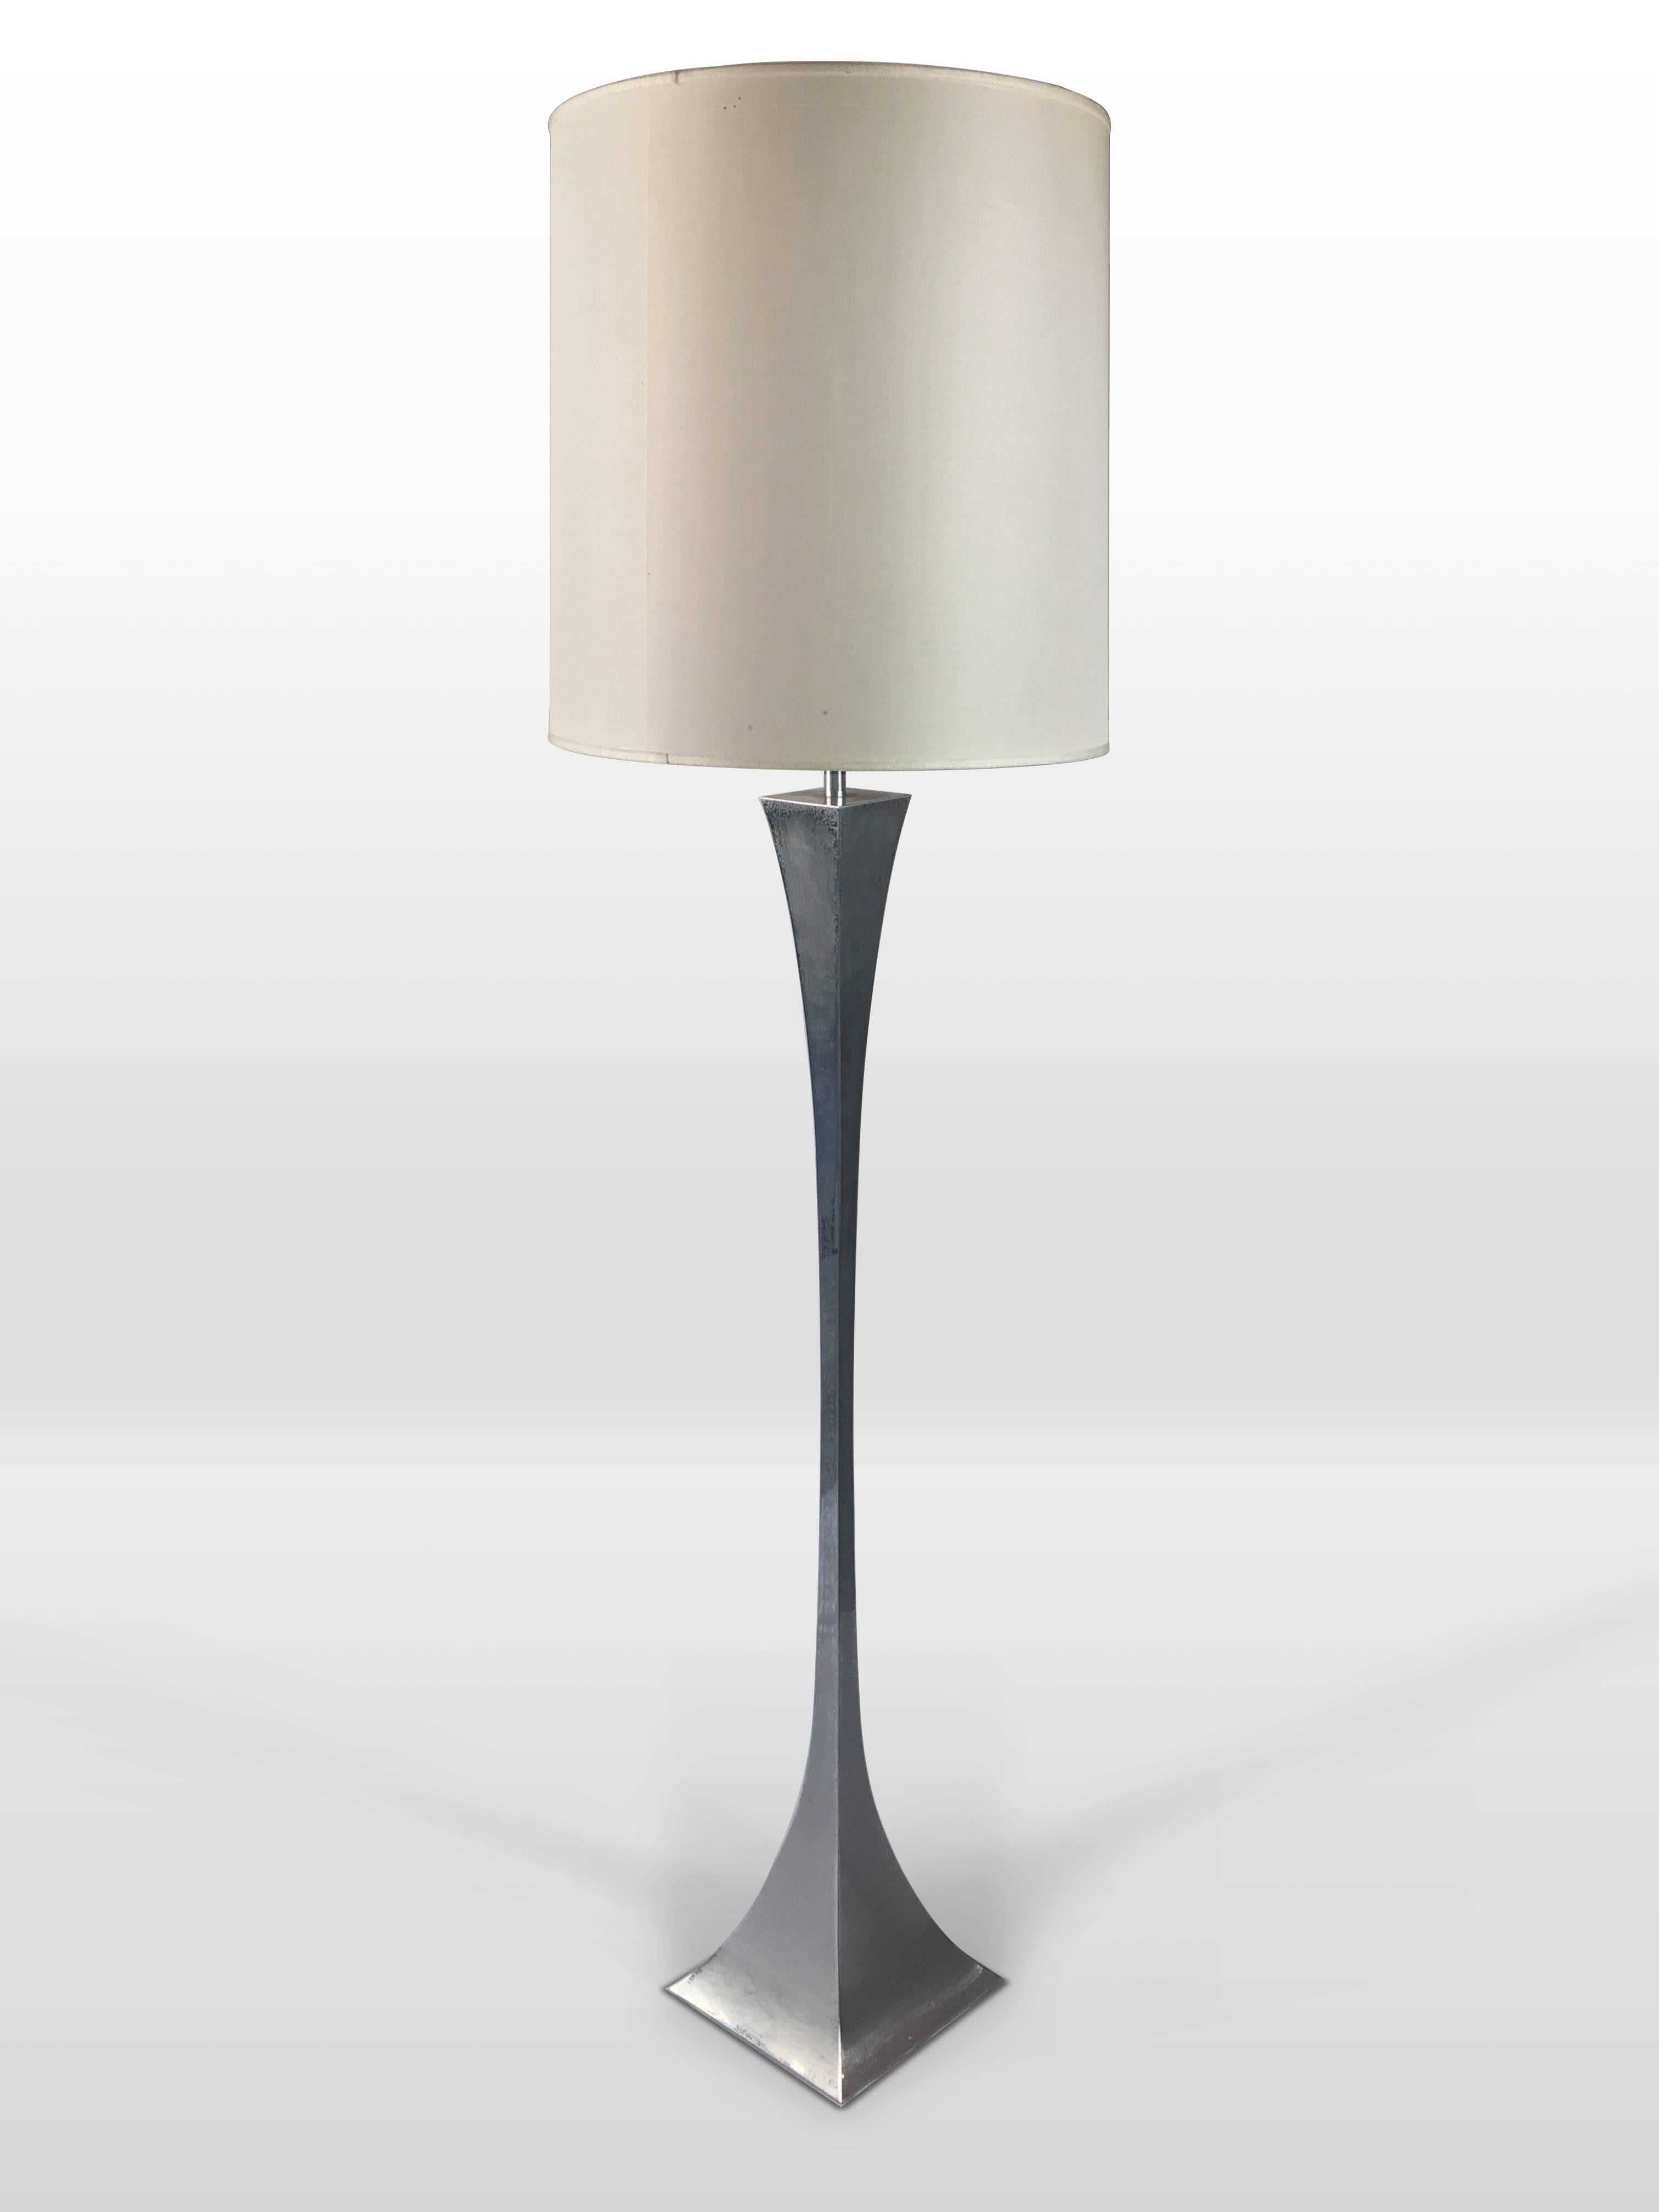 Italian chromed floor lamp with shader made in 1970s. Design by A. Montagna Grillo and A. Tonello.
 